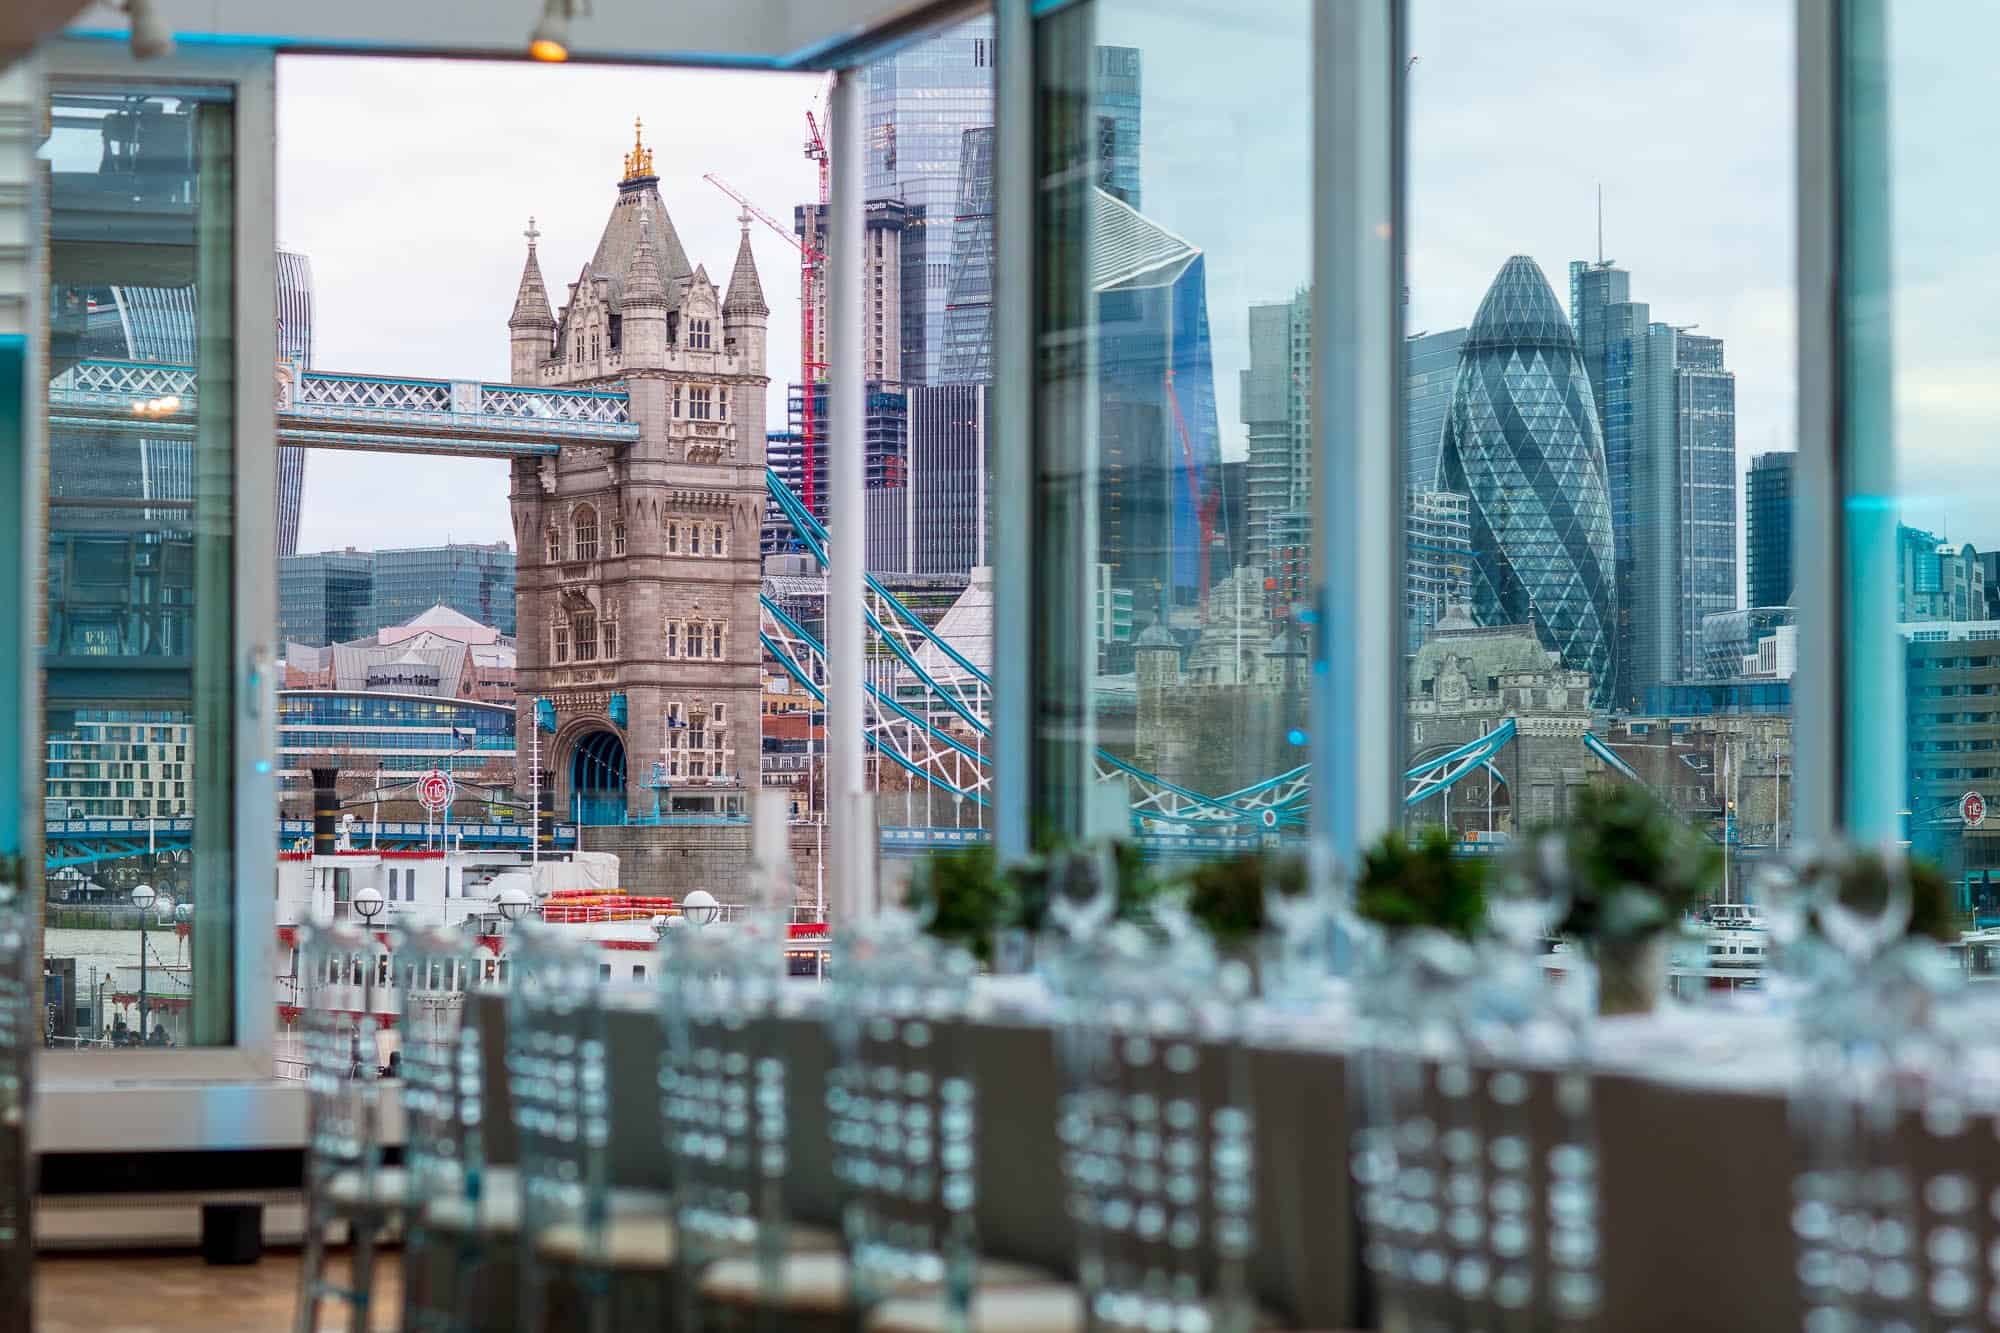 Tower Bridge SE1 - A fantastic daylight venue with views over Tower Bridge and the City. Ideally situated on the South Bank of the Thames - The Location Guys